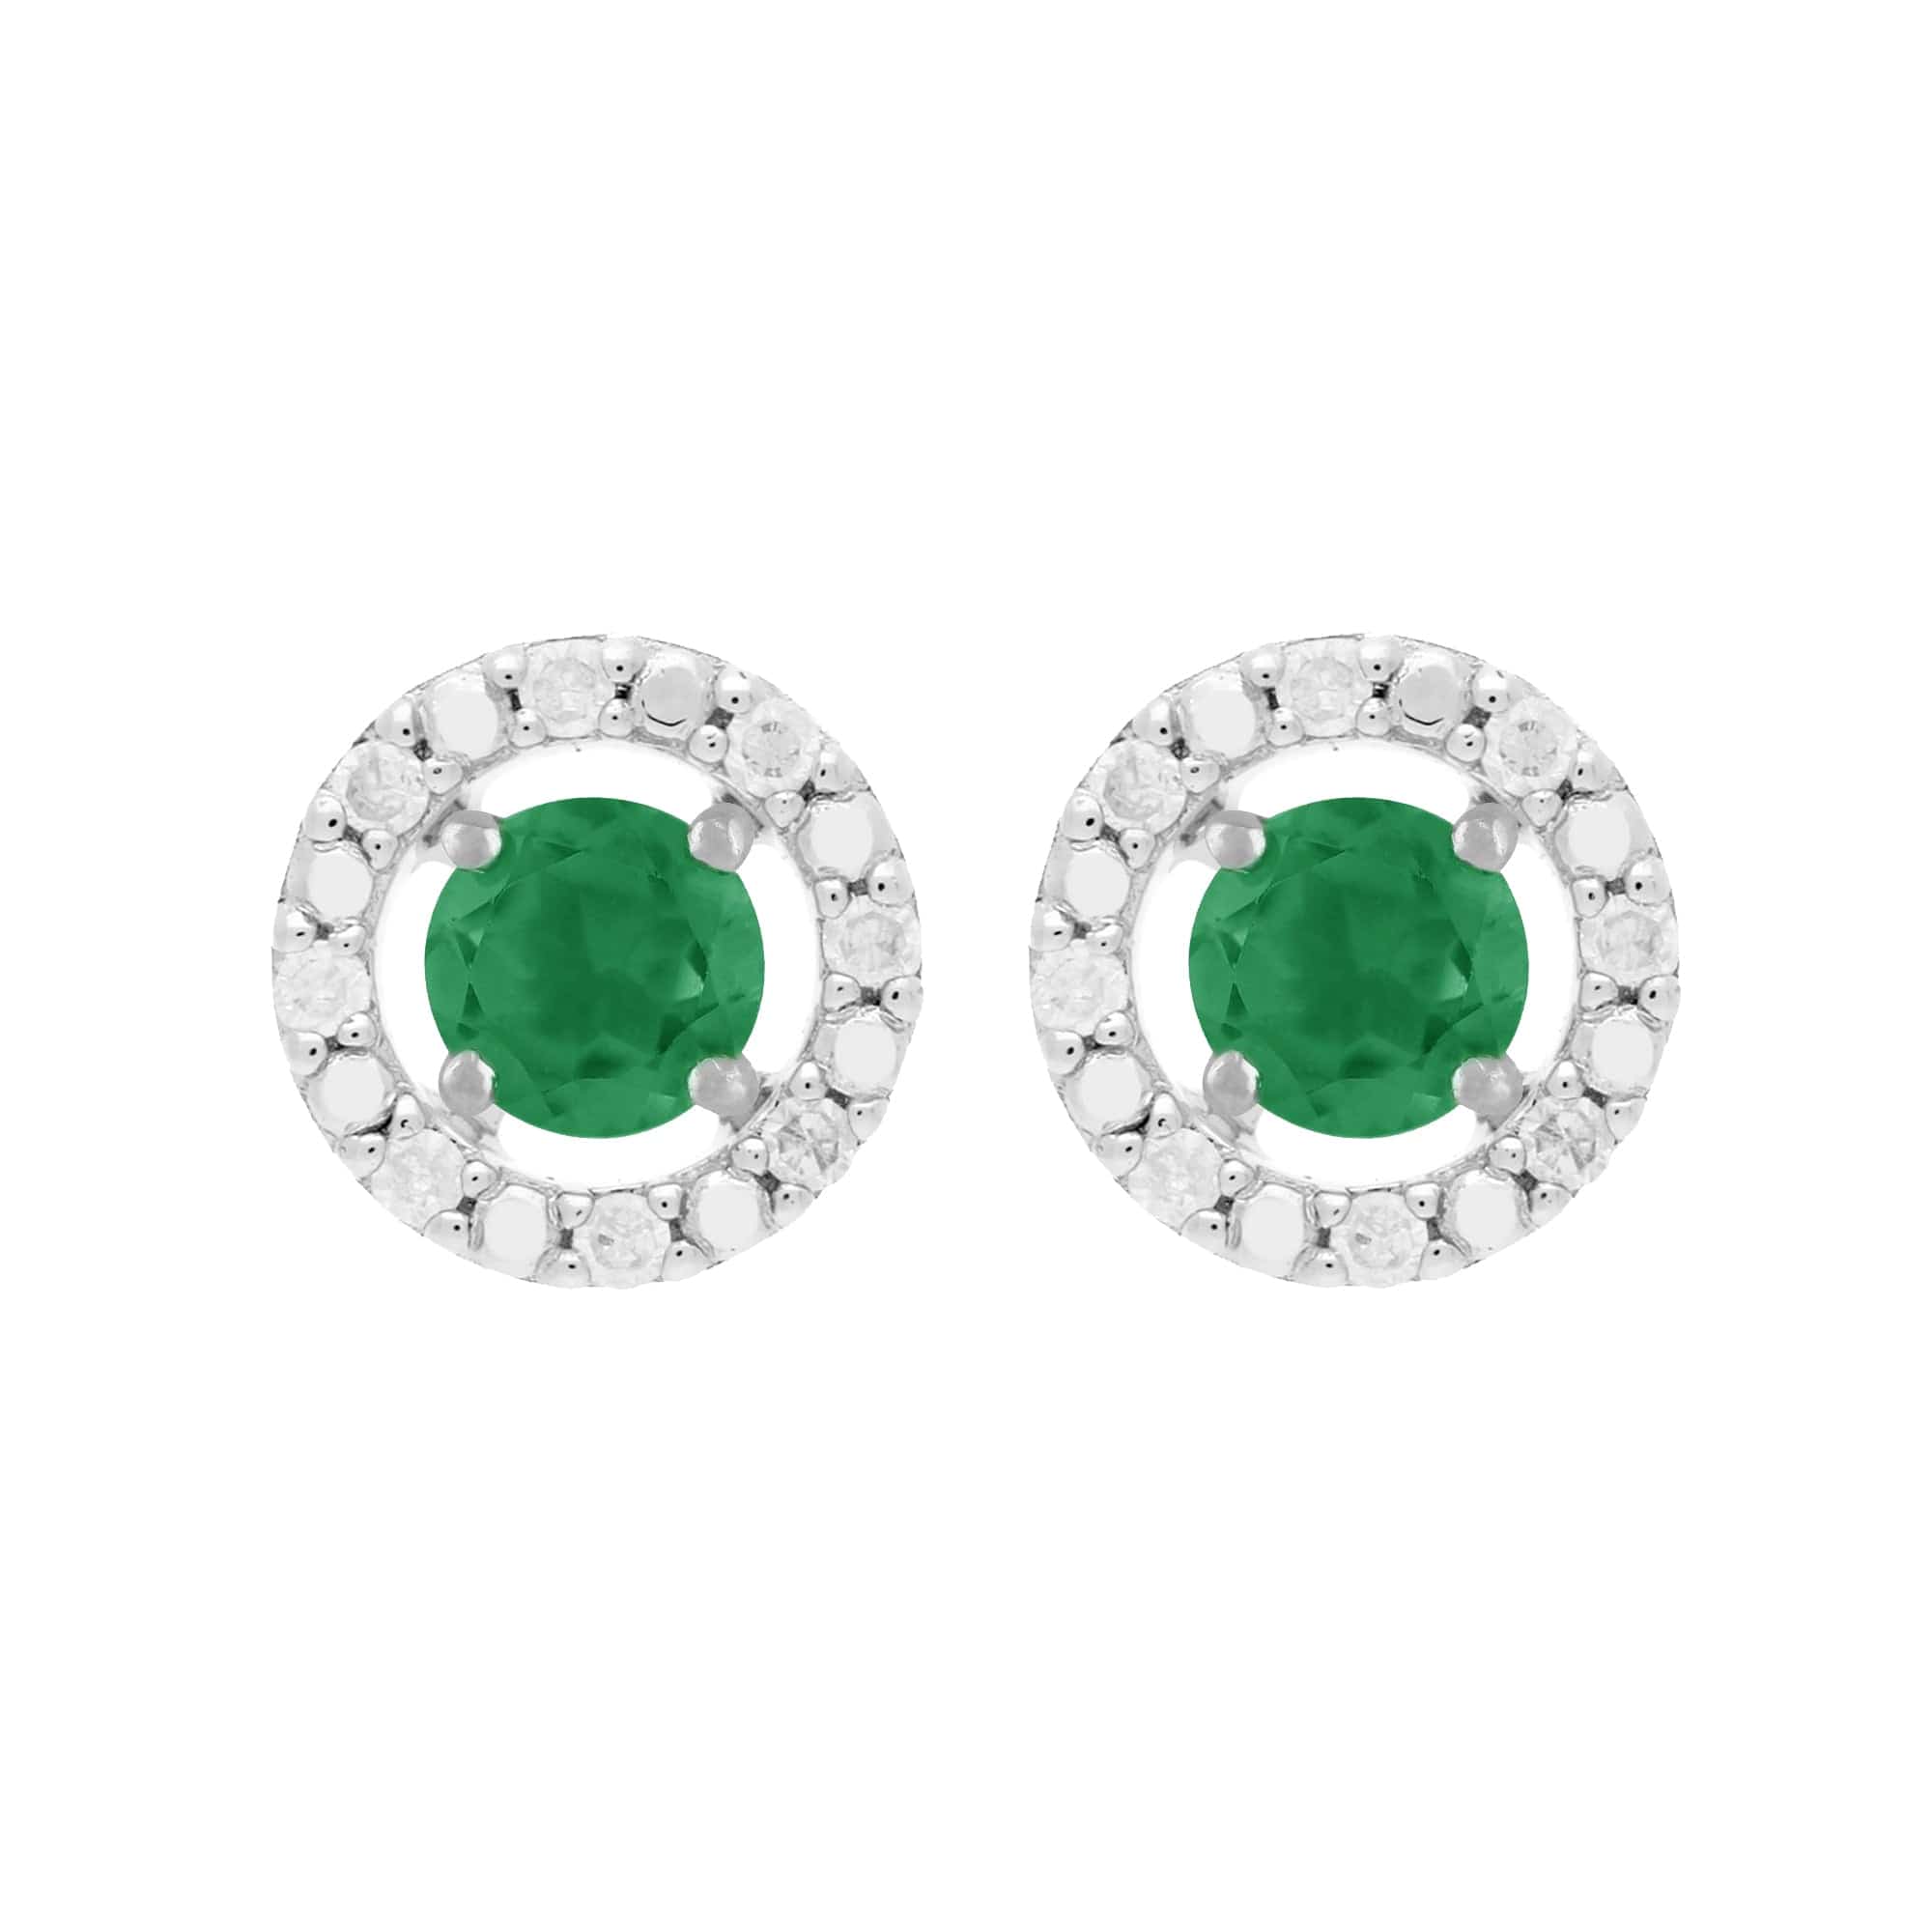 11621-162E0228019 Classic Round Emerald Stud Earrings with Detachable Diamond Round Ear Jacket in 9ct White Gold 1